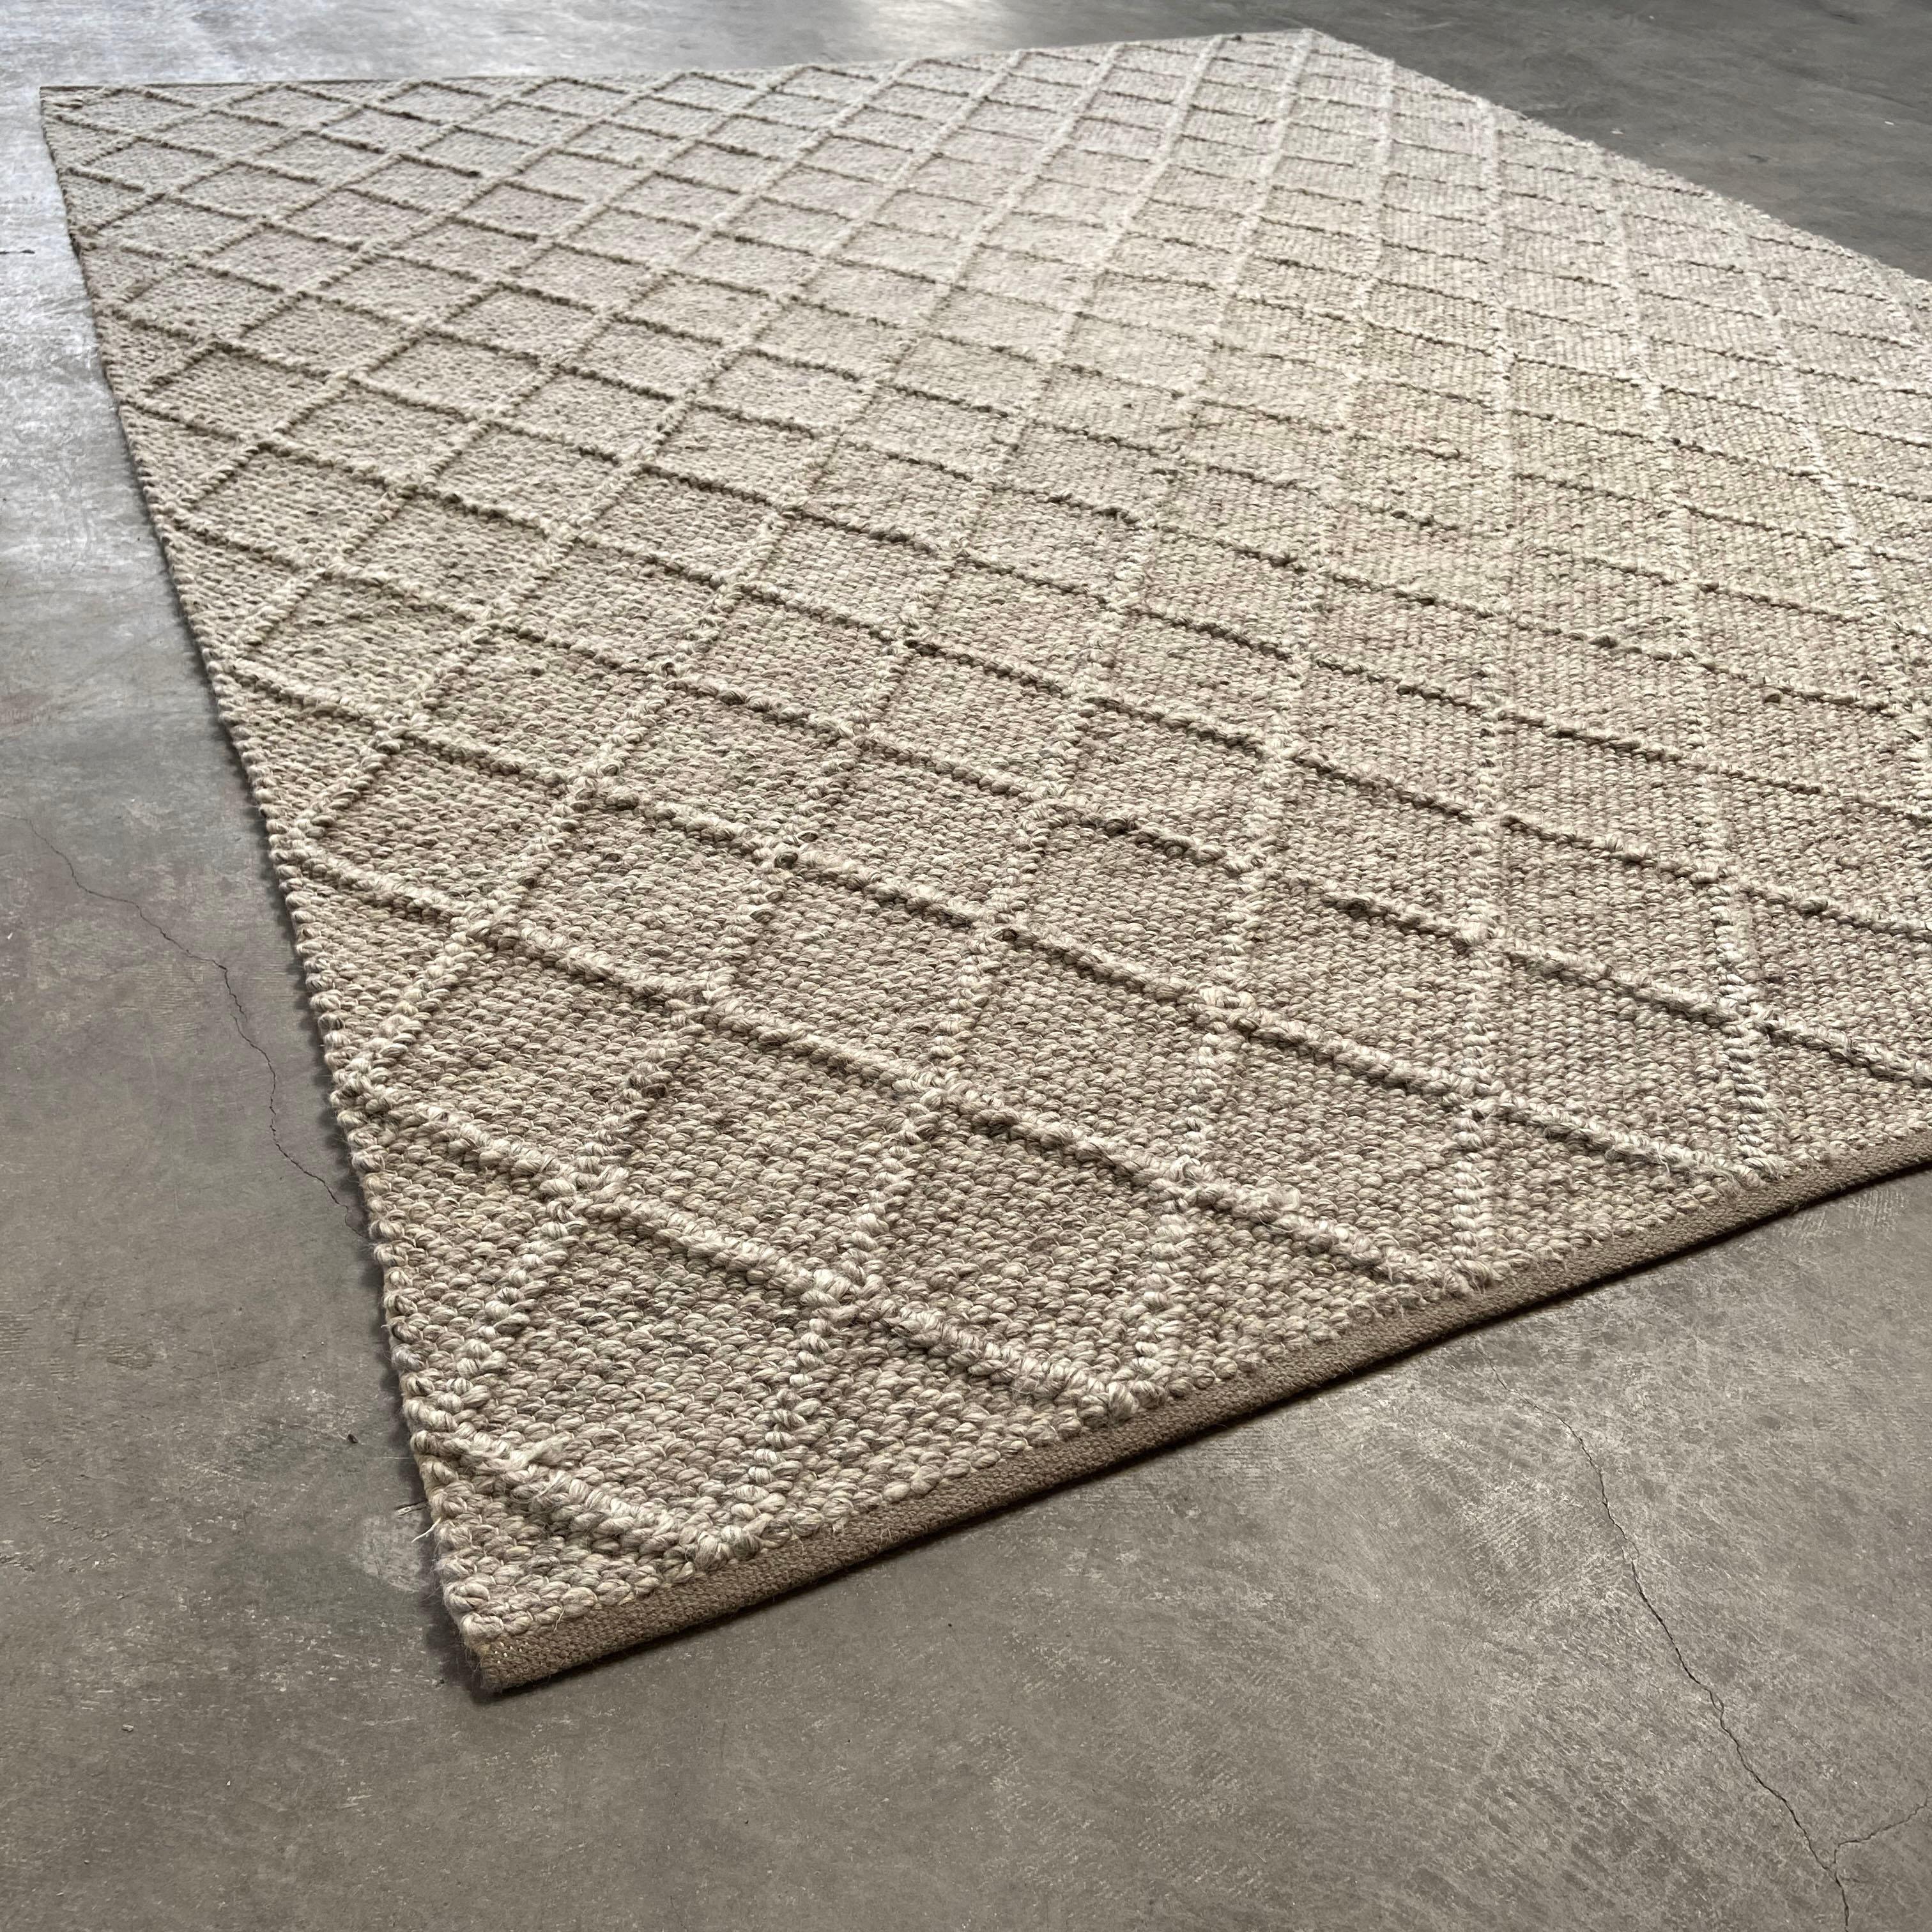 RH wool braided rug by Ben Soleimani in natural and gray tones.
This item has been gently used as showroom display, and has been professionally cleaned. Item is wrapped and ready for shipping.
Approx dimensions: 8 x 10.